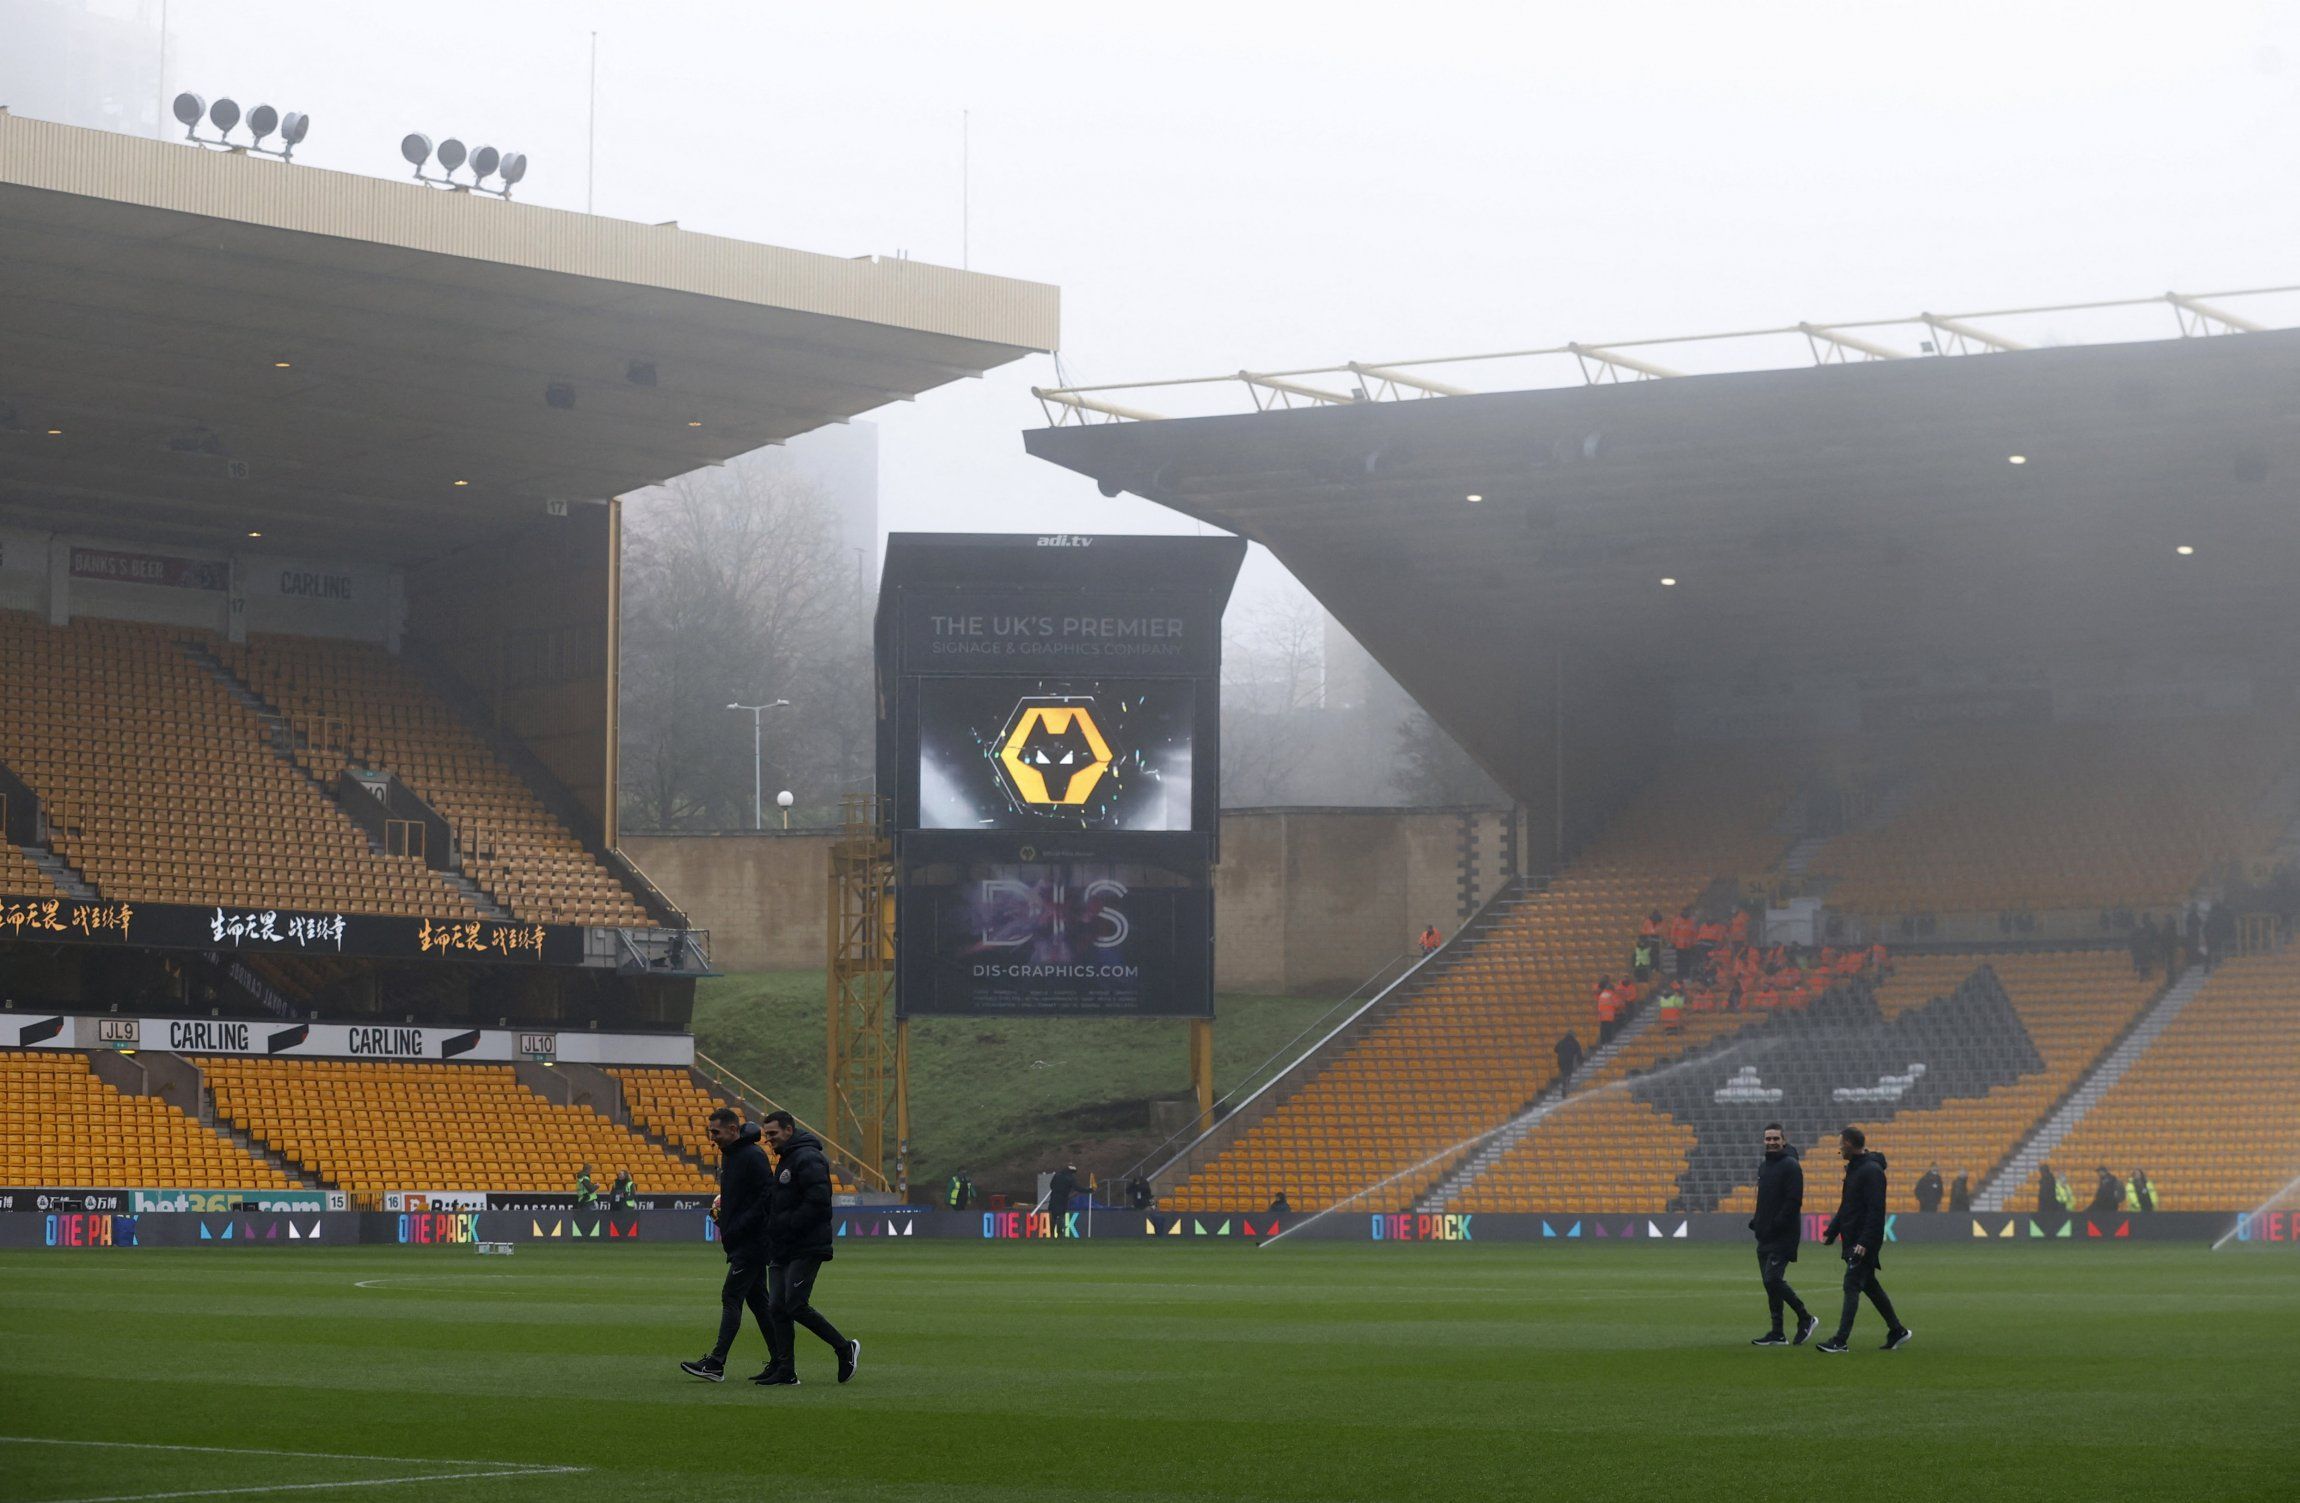 Bruno Lage, Fosun, Jeff Shi, Molineux, The Old Gold, Wolves, Wolves fans, Wolves info, Wolves latest, Wolves news, Wolves updates, WWFC, WWFC news, WWFC update, Premier League, Premier League news, Wolverhampton Wanderers, Wolves transfer news, January transfer window, Wolves 2021 quiz, Wolves quiz, 2021, 
